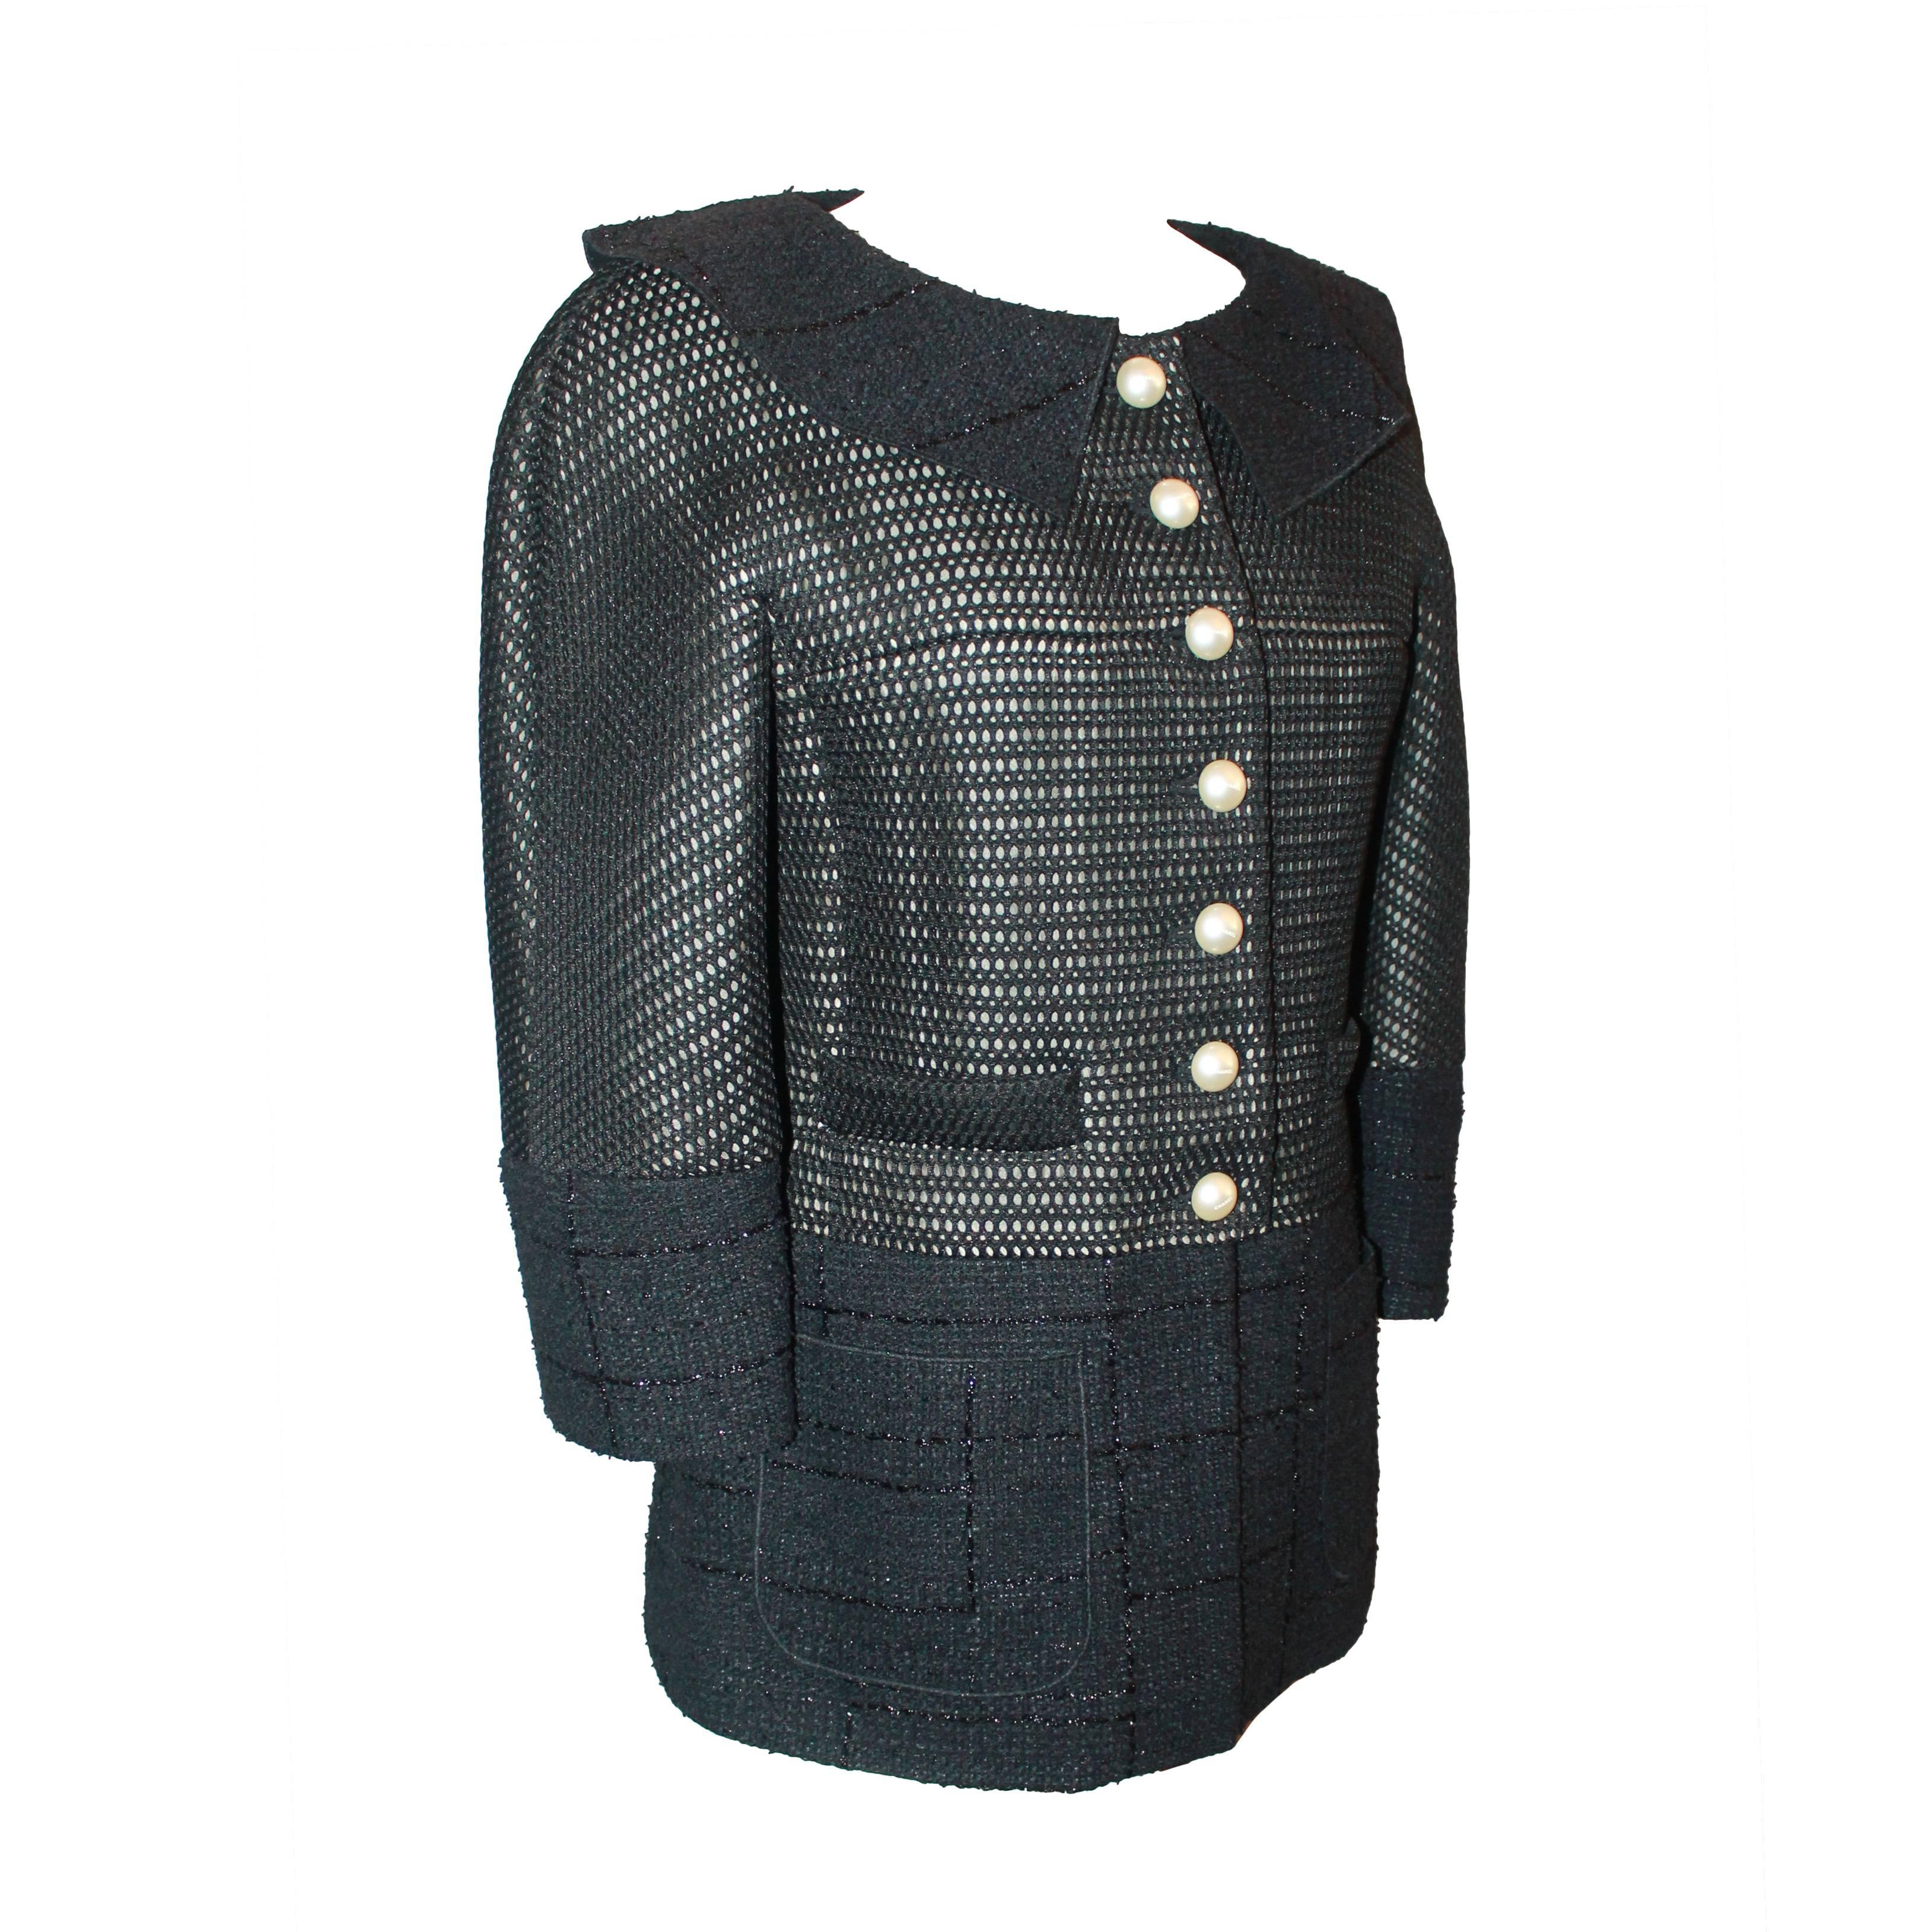 Chanel Black Eyelet and Tweed Jacket with Pearl Buttons - 42